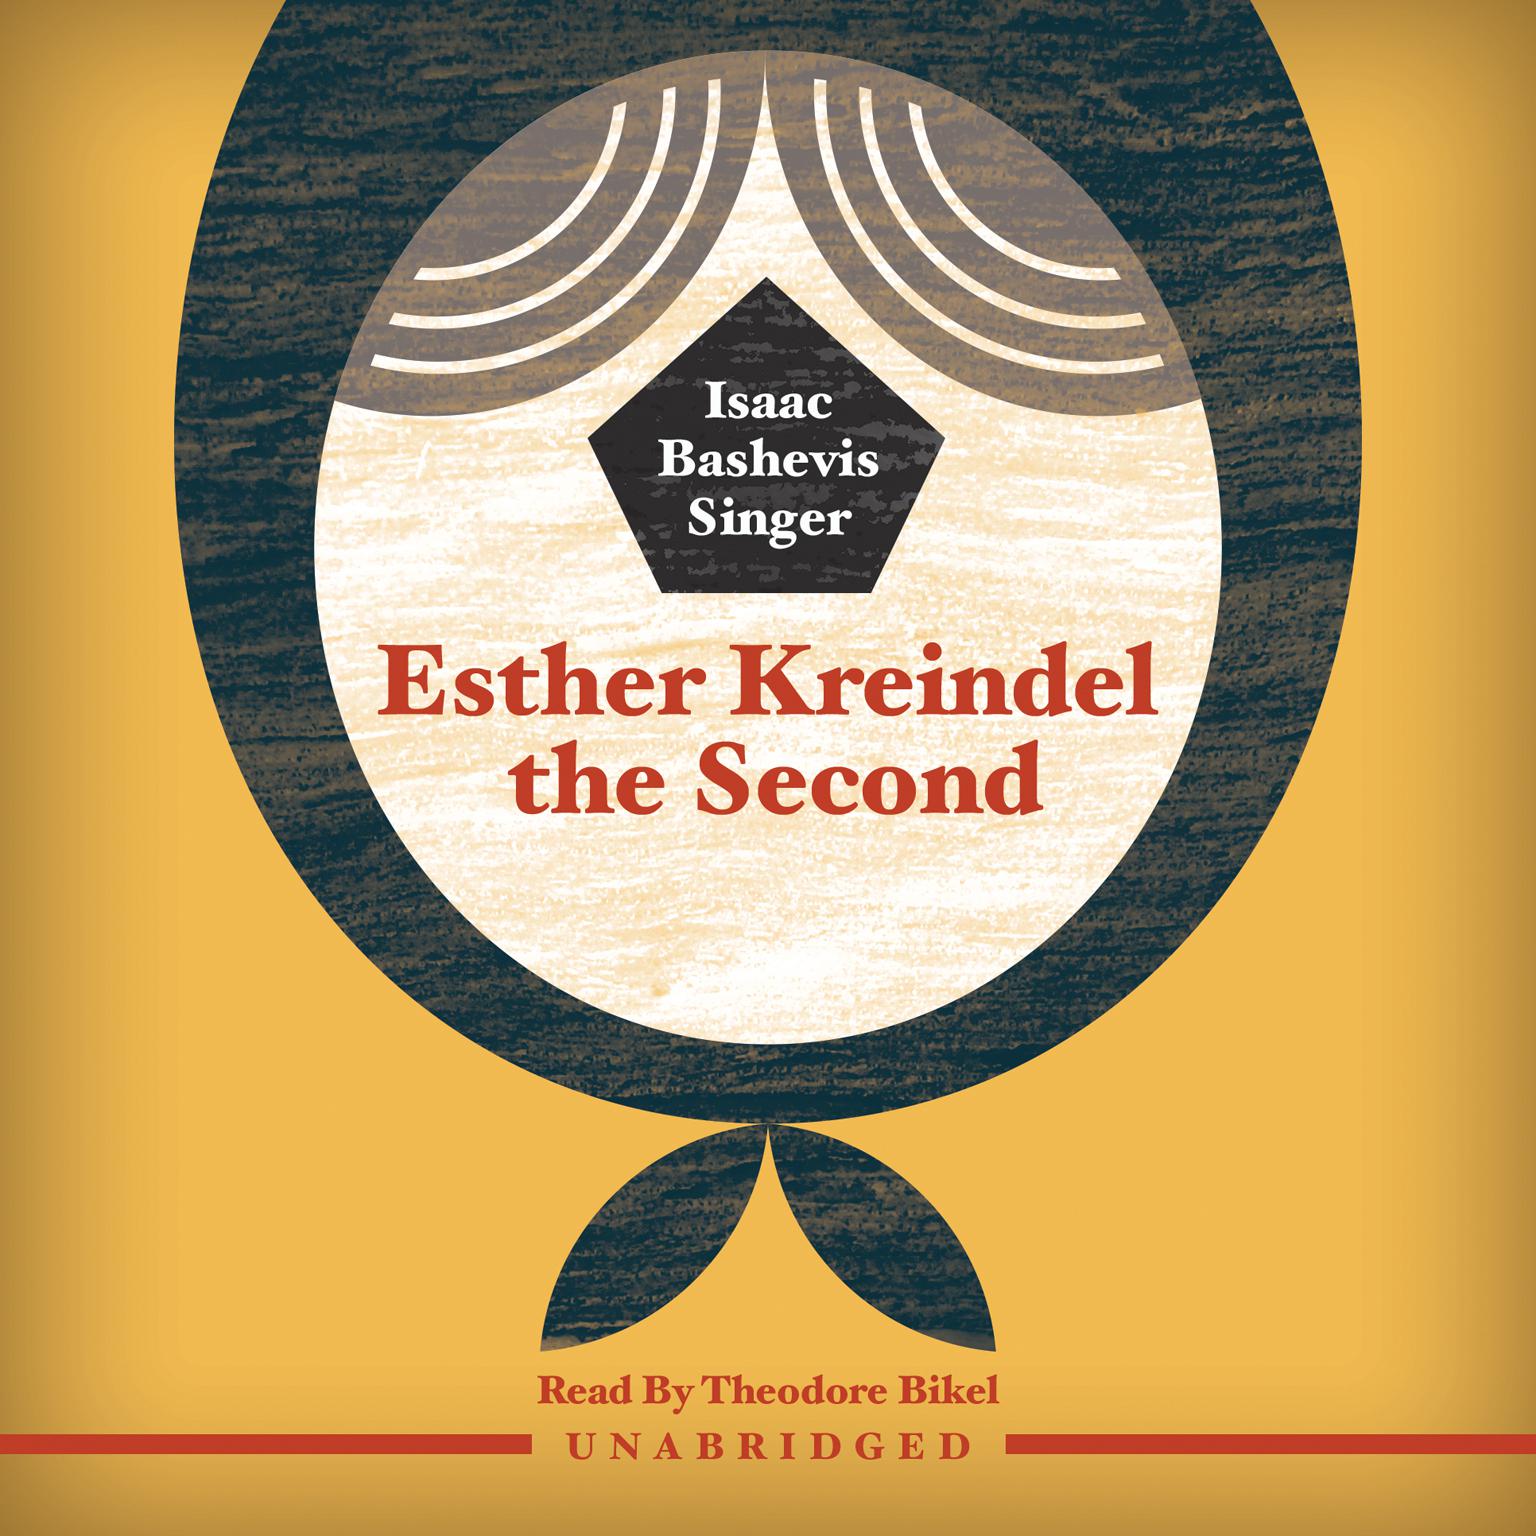 Esther Kreindel the Second Audiobook, by Isaac Bashevis Singer